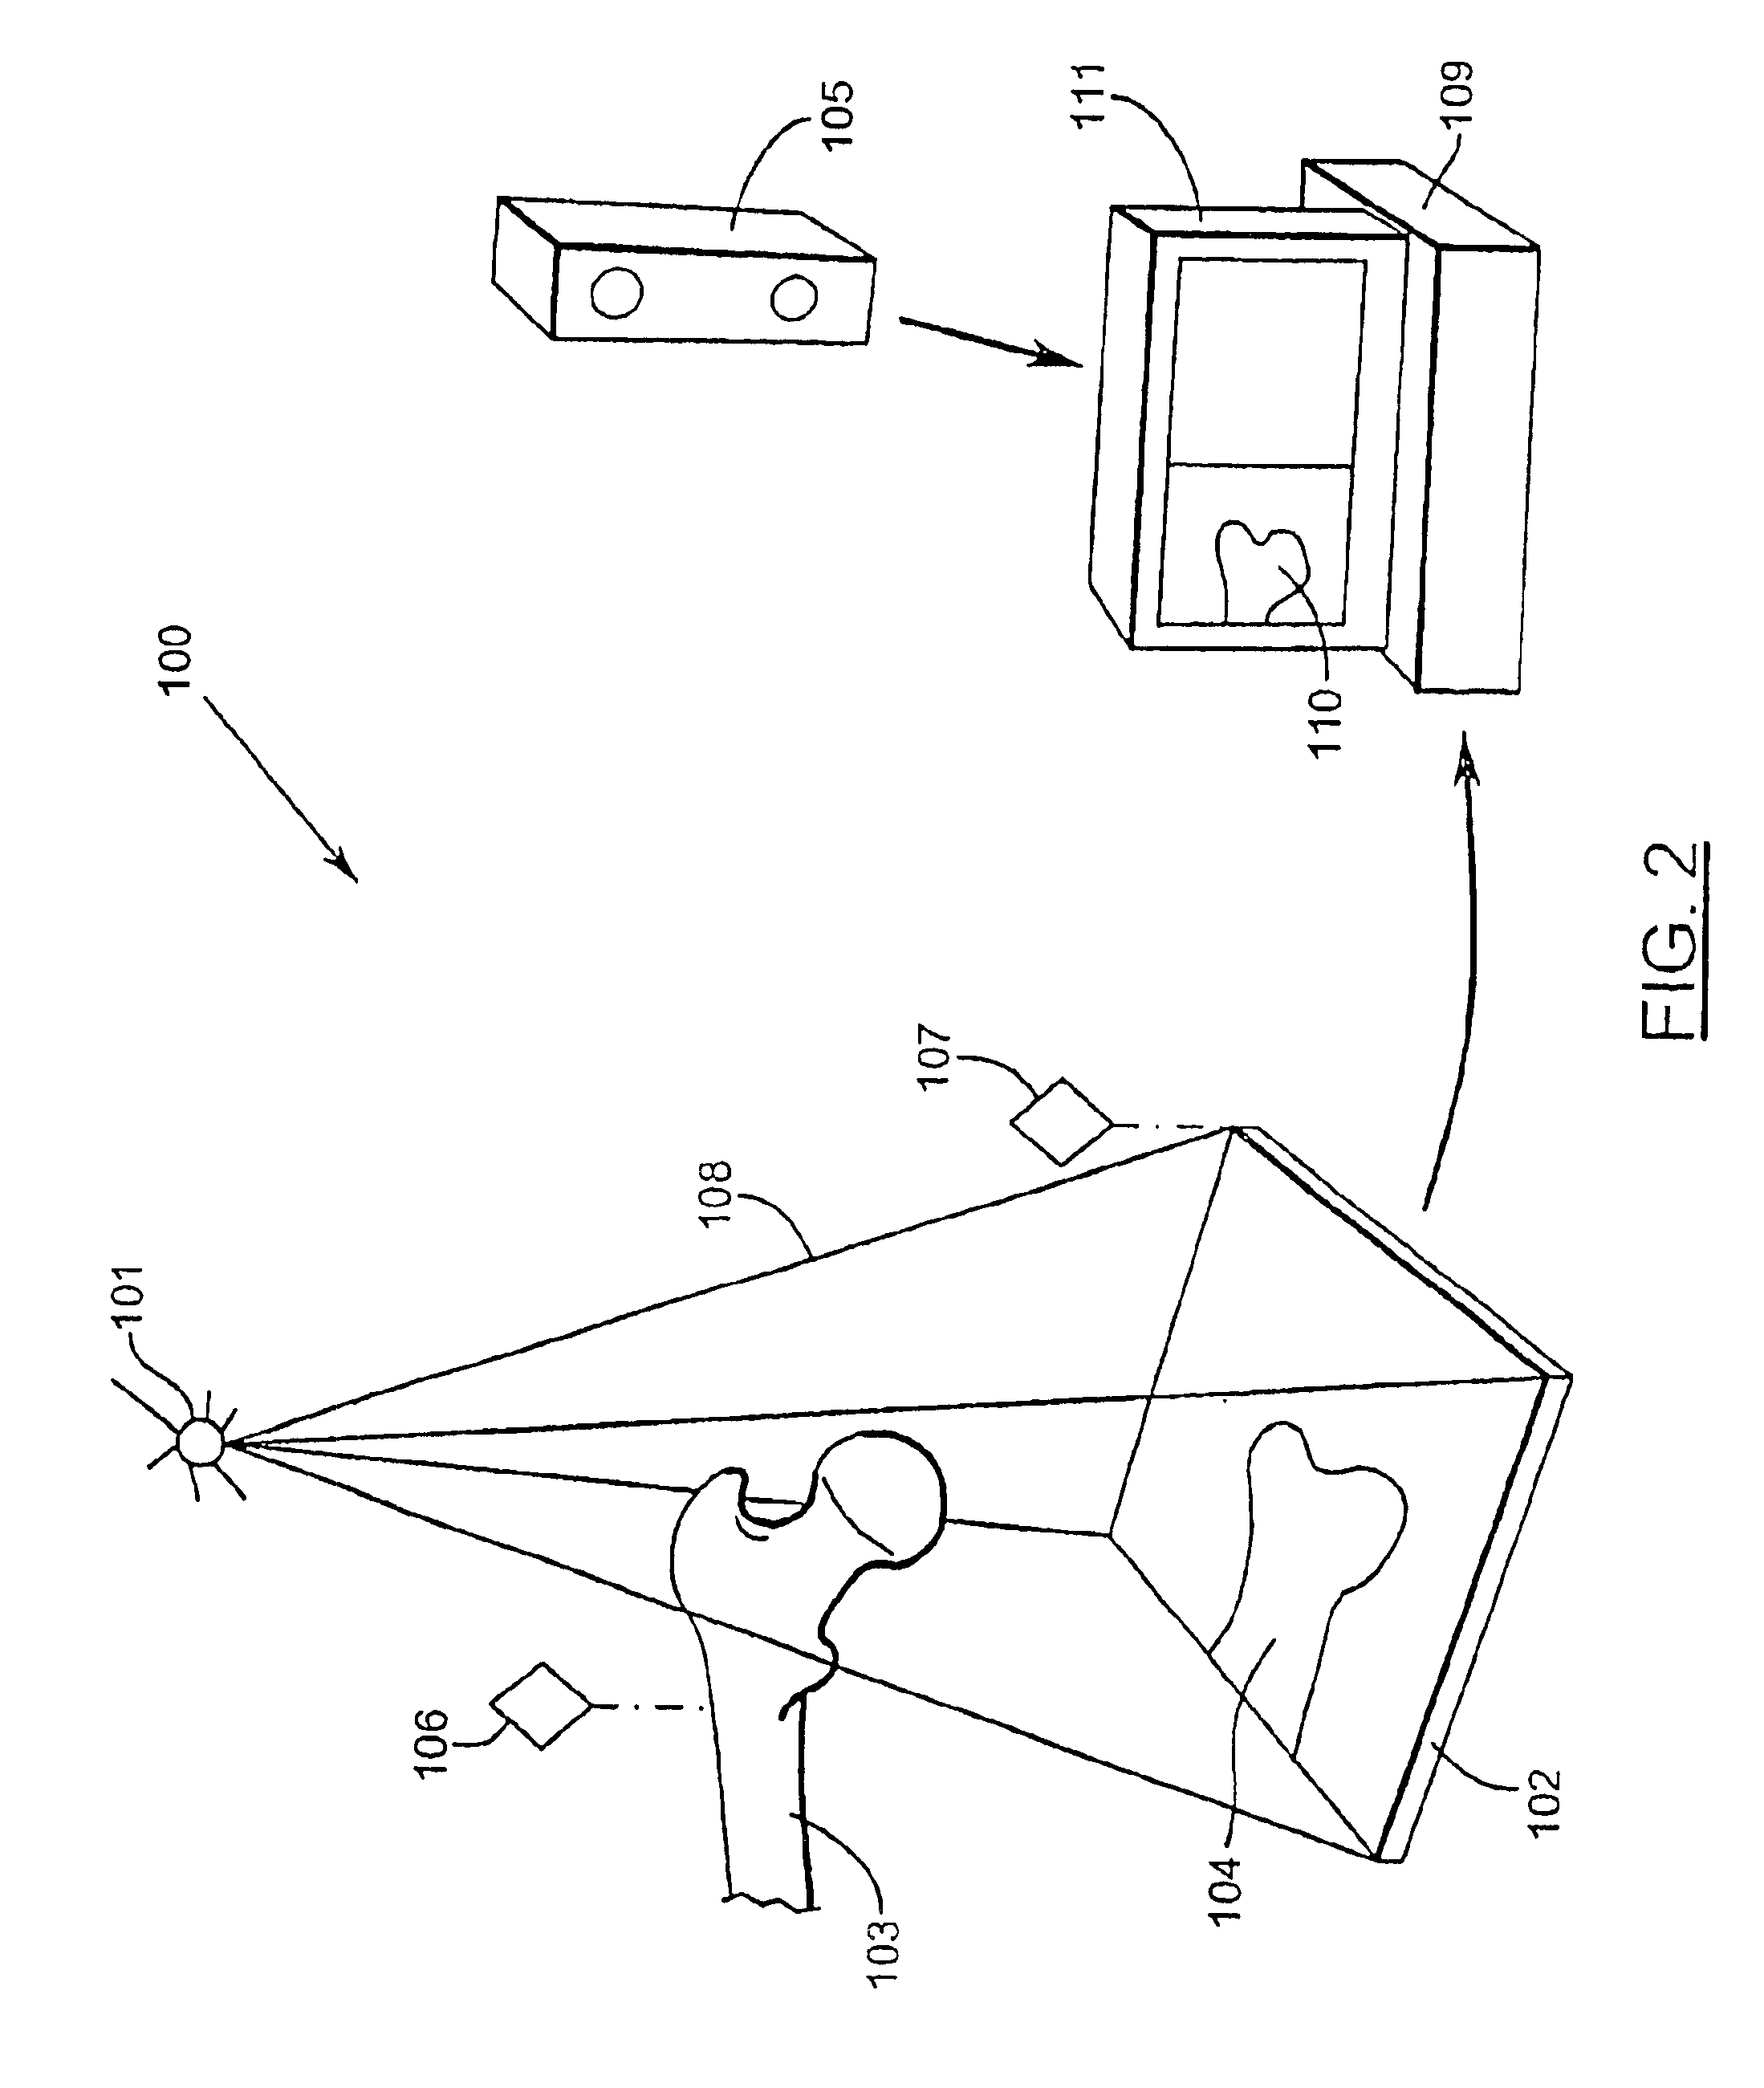 Apparatuses and methods for surgical navigation